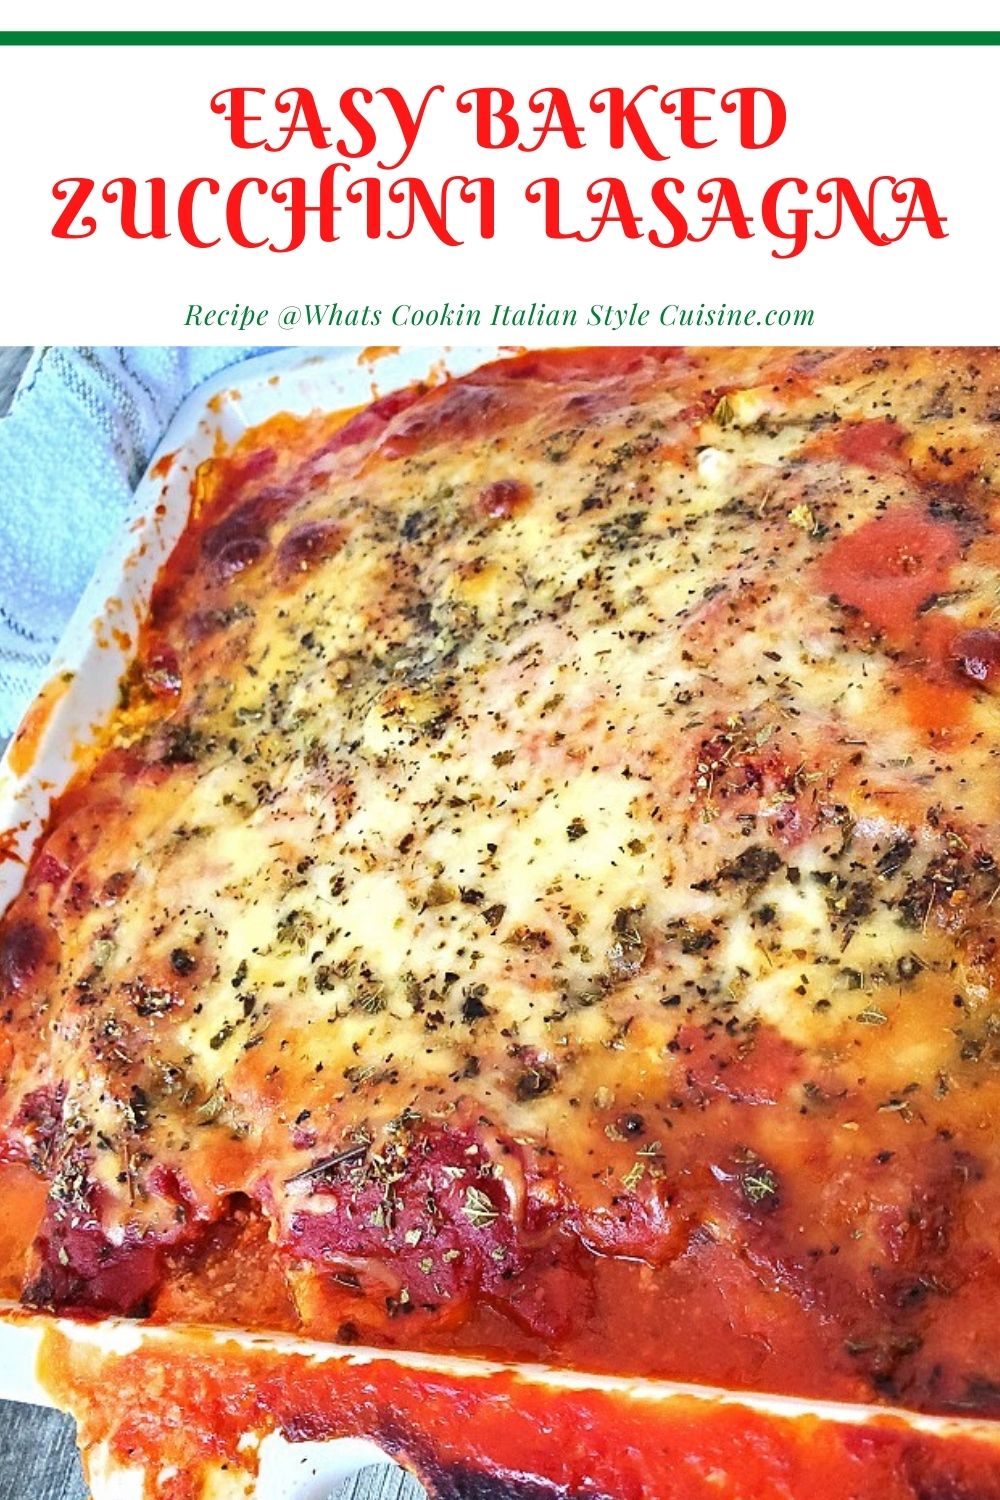 Easy Baked Zucchini Lasagna | What's Cookin' Italian Style Cuisine